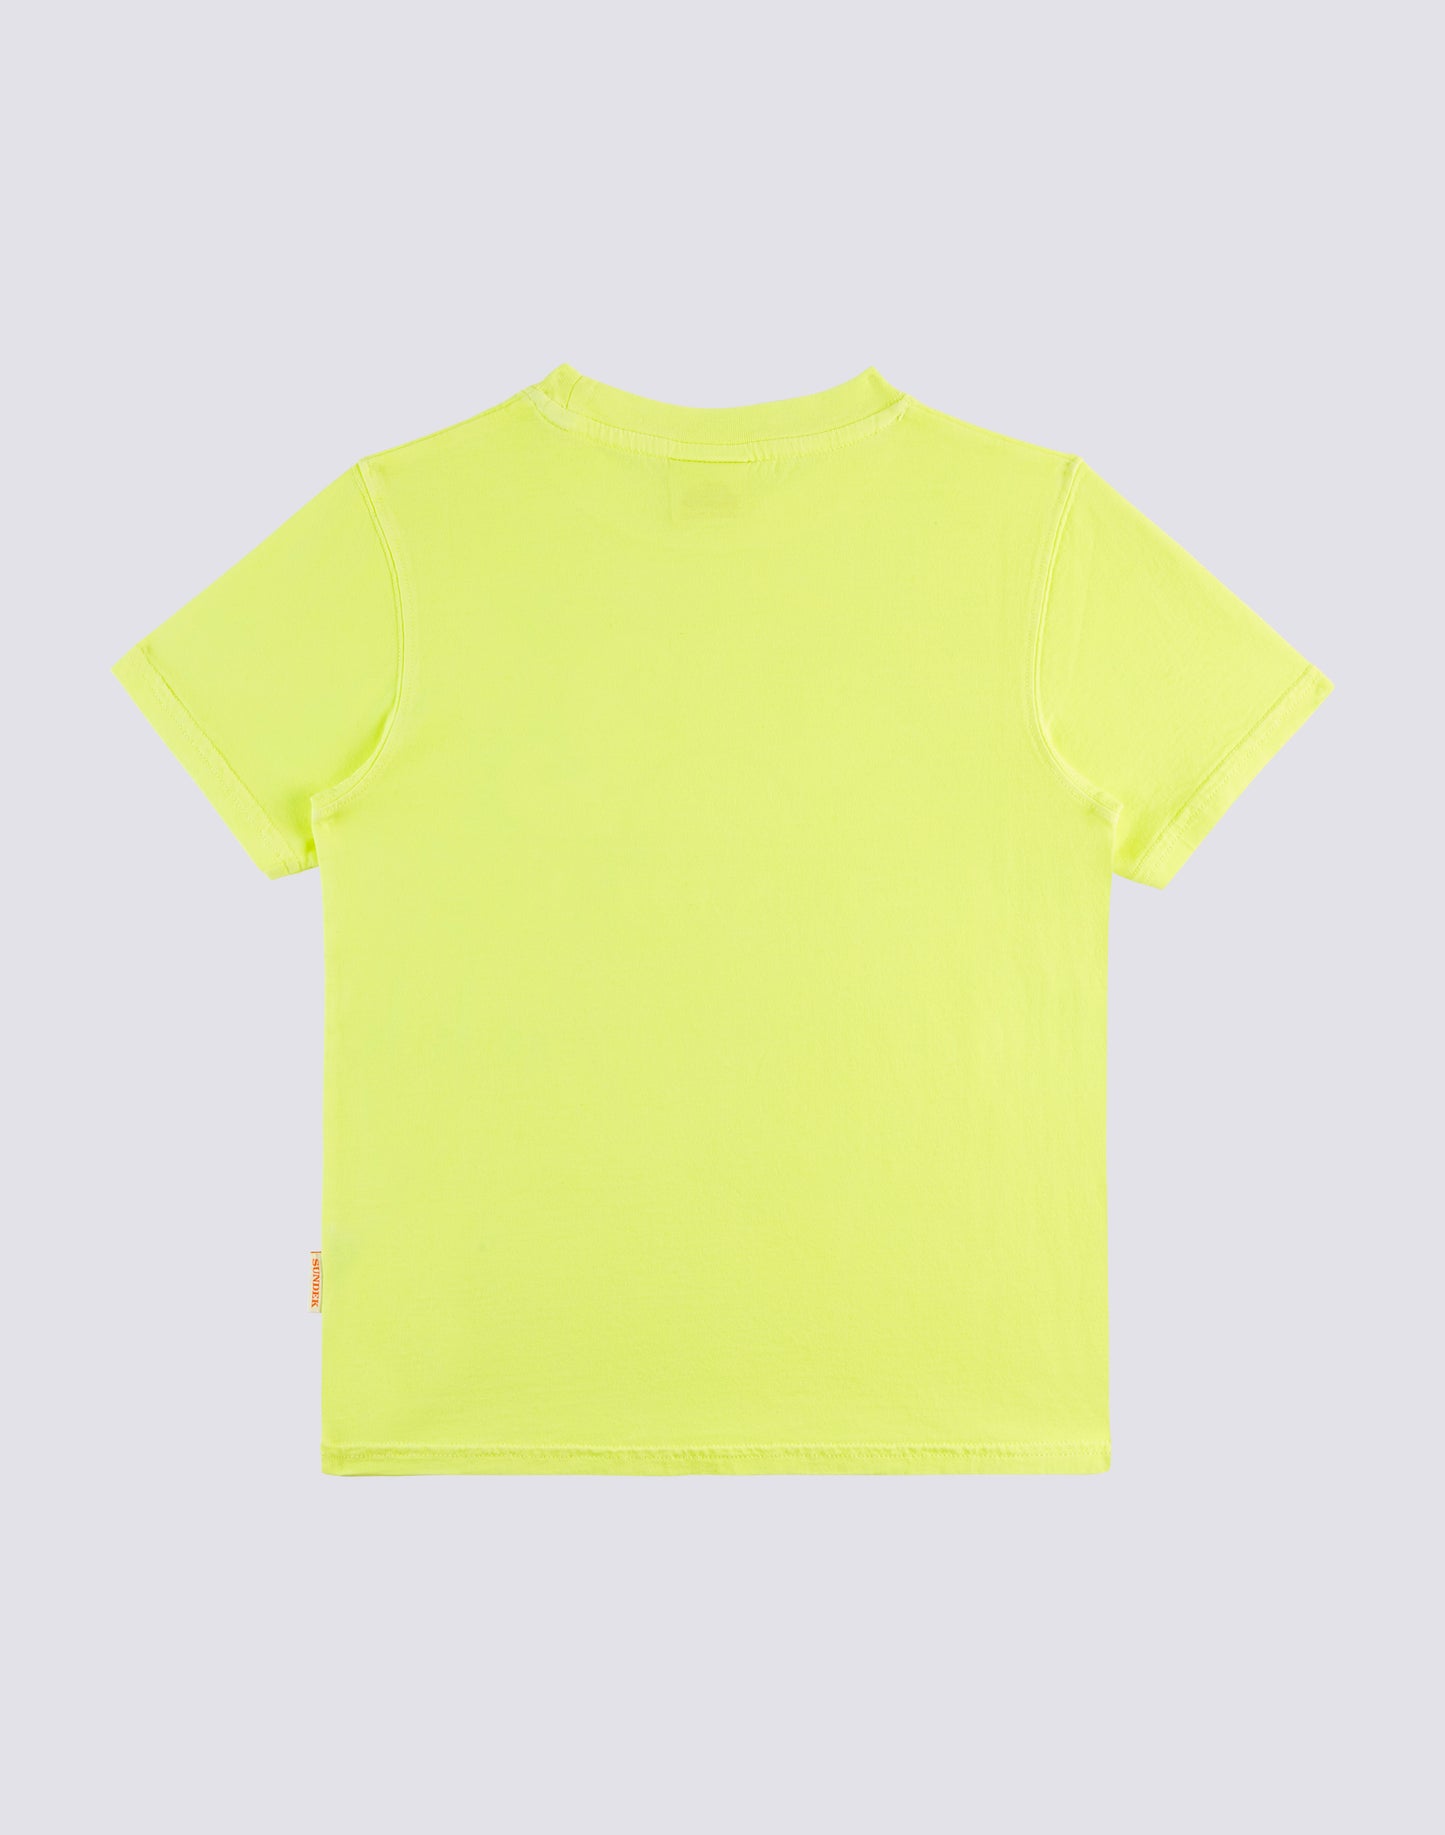 SHORT SLEEVE T-SHIRT IN OVERDYED COTTON